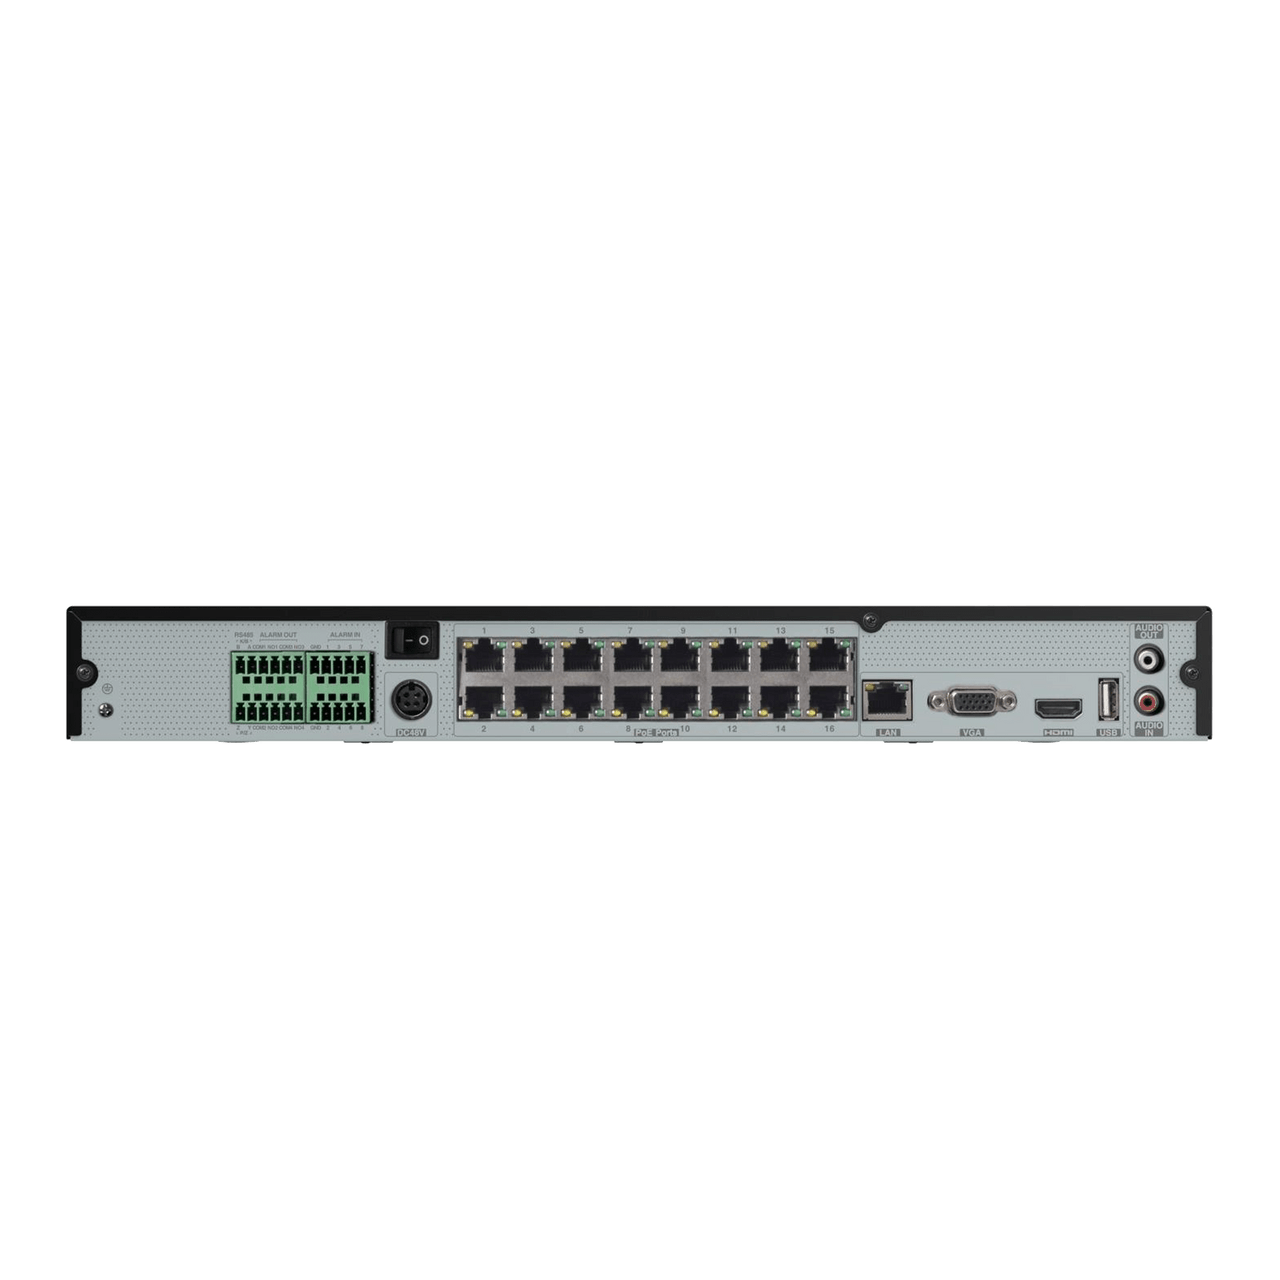 Speco Technologies N16NRE14TB 16 Channel Facial Recognition Recorder with Smart Analytics- 14TB